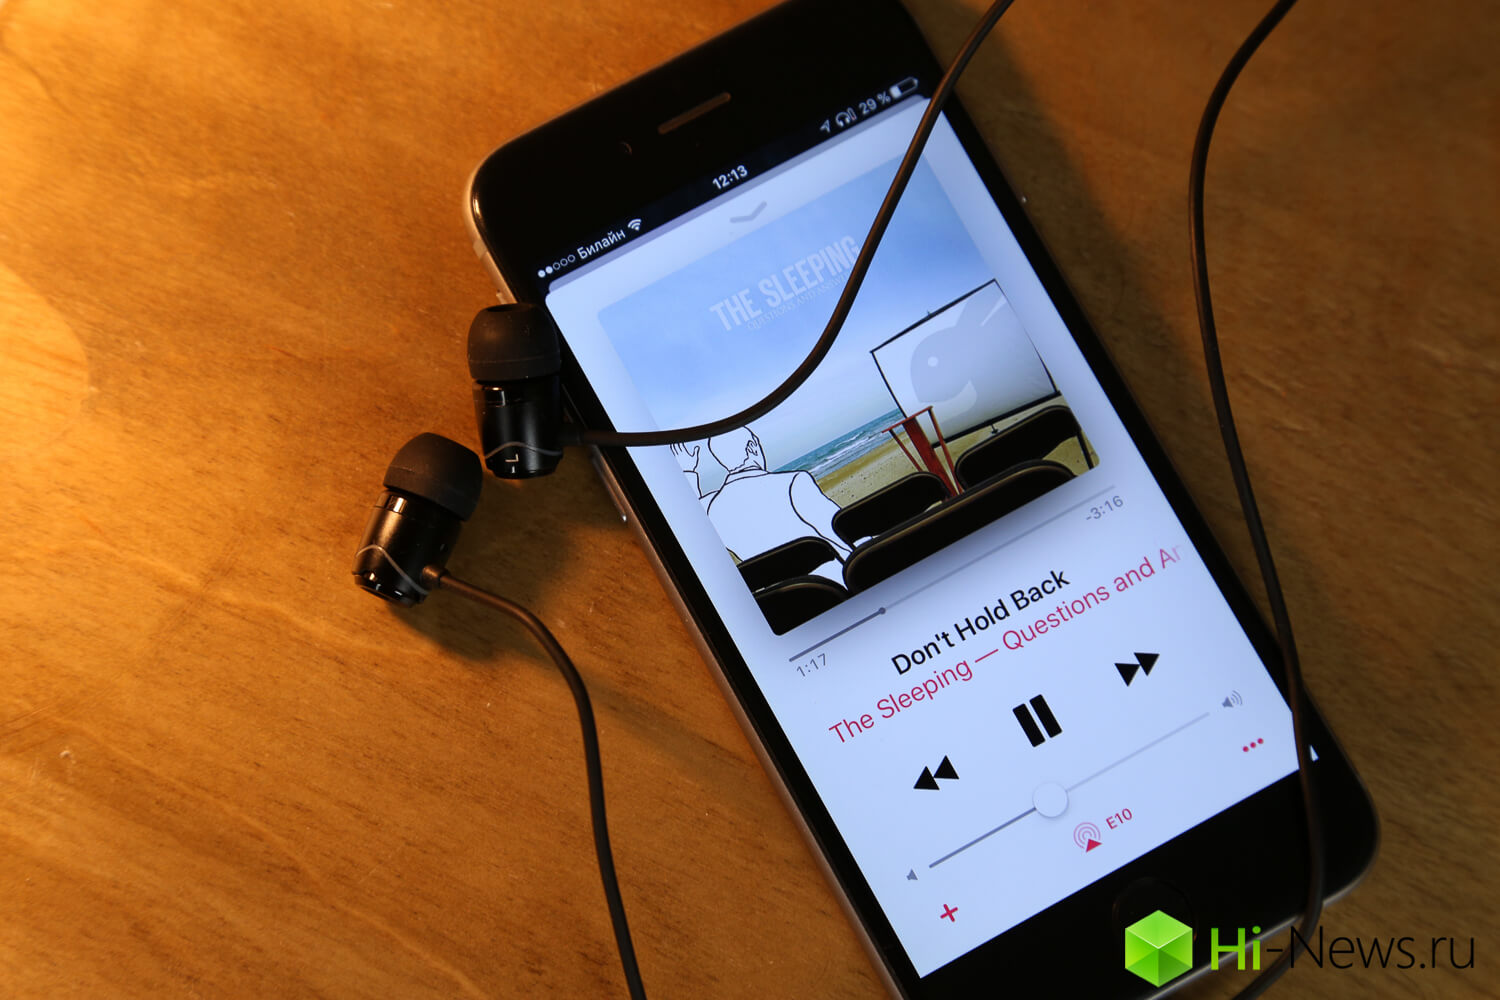 Review headphones SoundMagic E10BT: Marquis who outdid the king